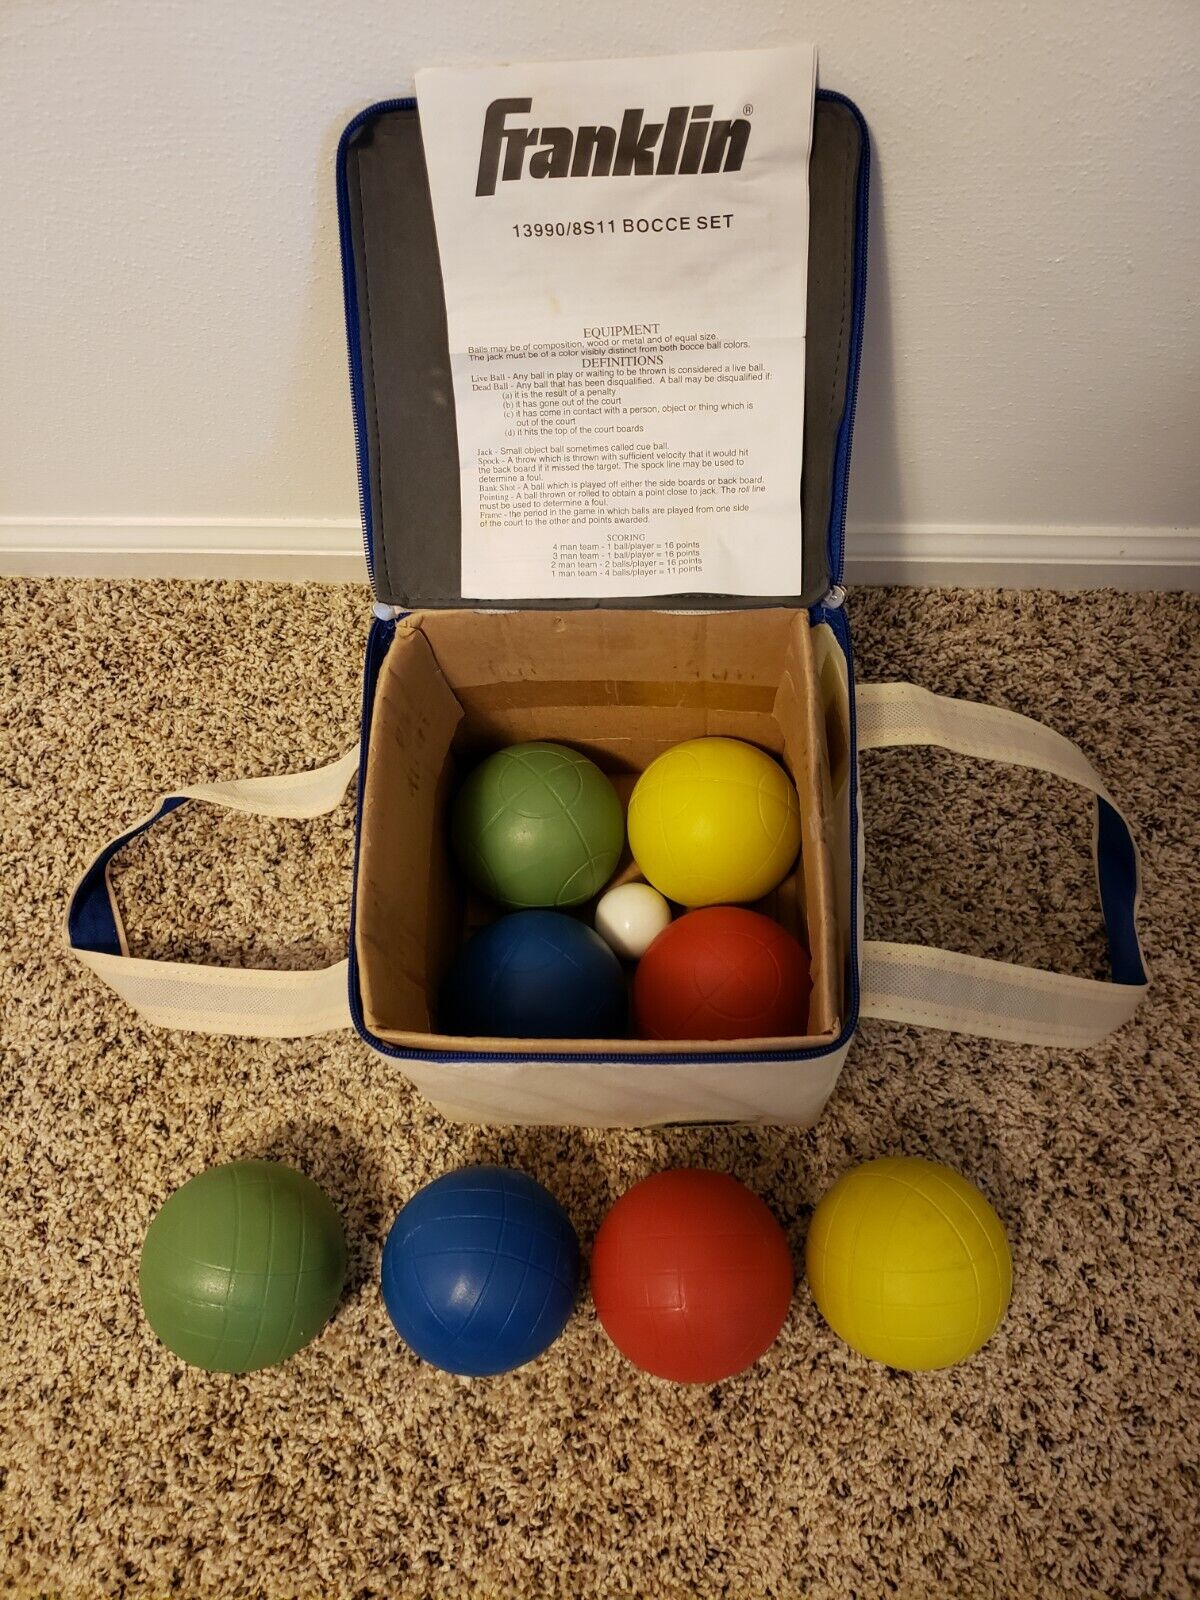 Spring new work Franklin Bocce Set with case tote 8S11 bag 13990 Preowned New life